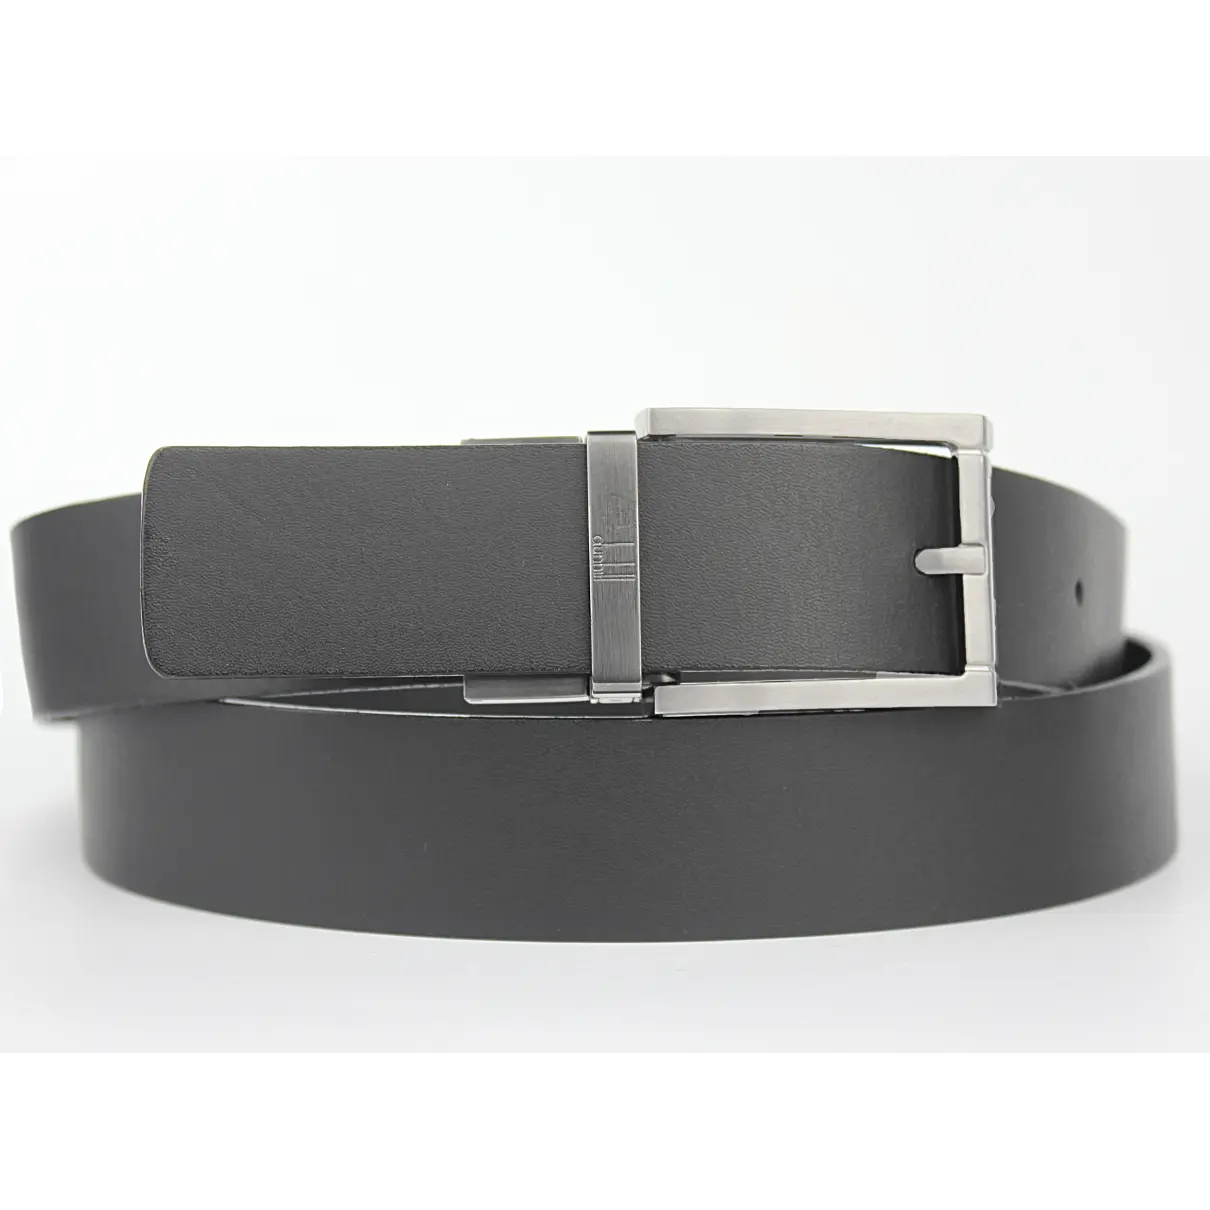 Alfred Dunhill Leather belt for sale